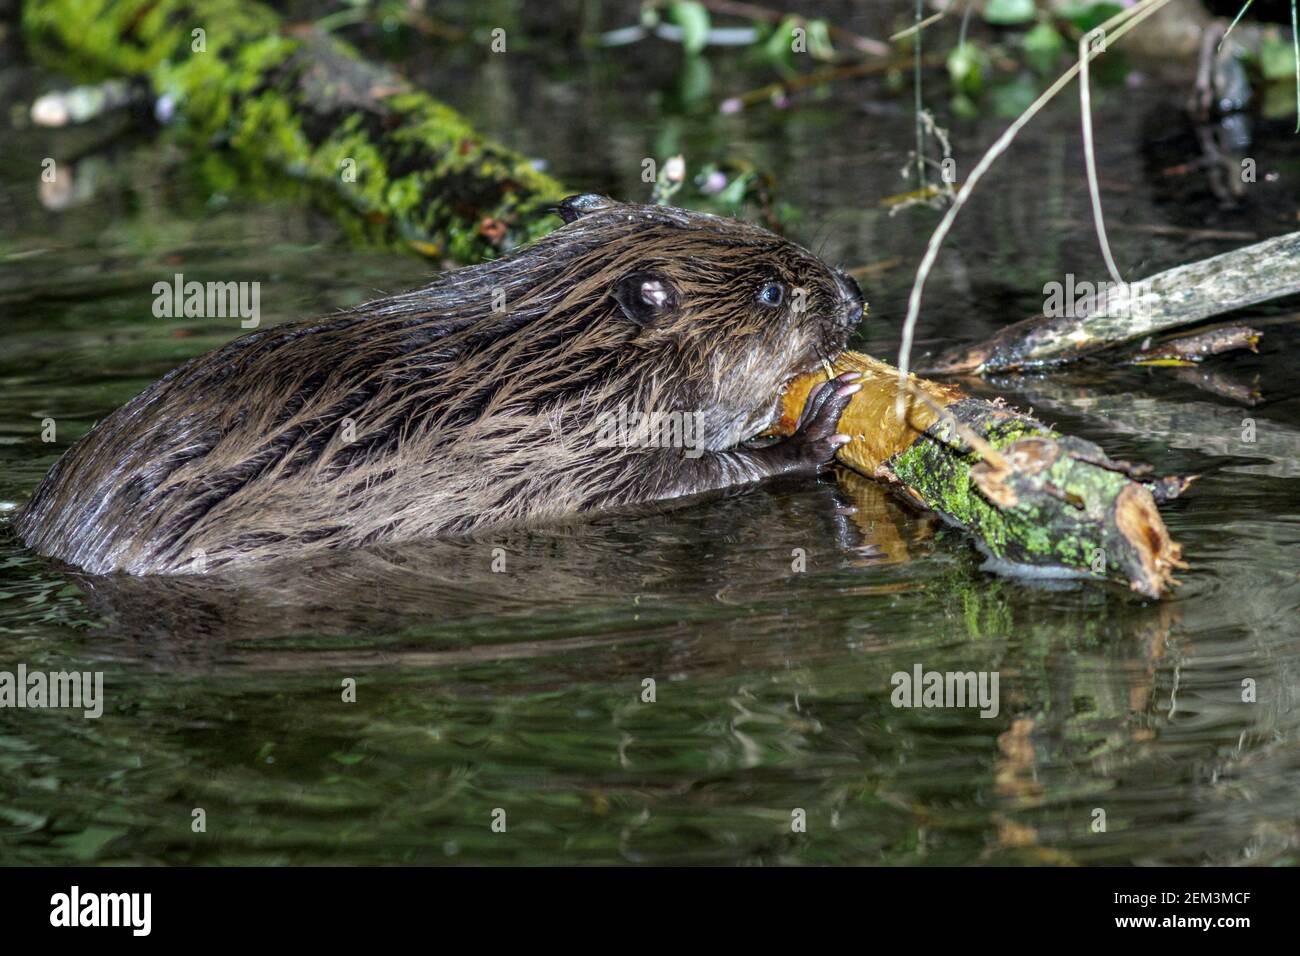 Eurasian beaver, European beaver (Castor fiber), nibbling at a branch in shallow water at the shore, side view, Germany, Baden-Wuerttemberg Stock Photo